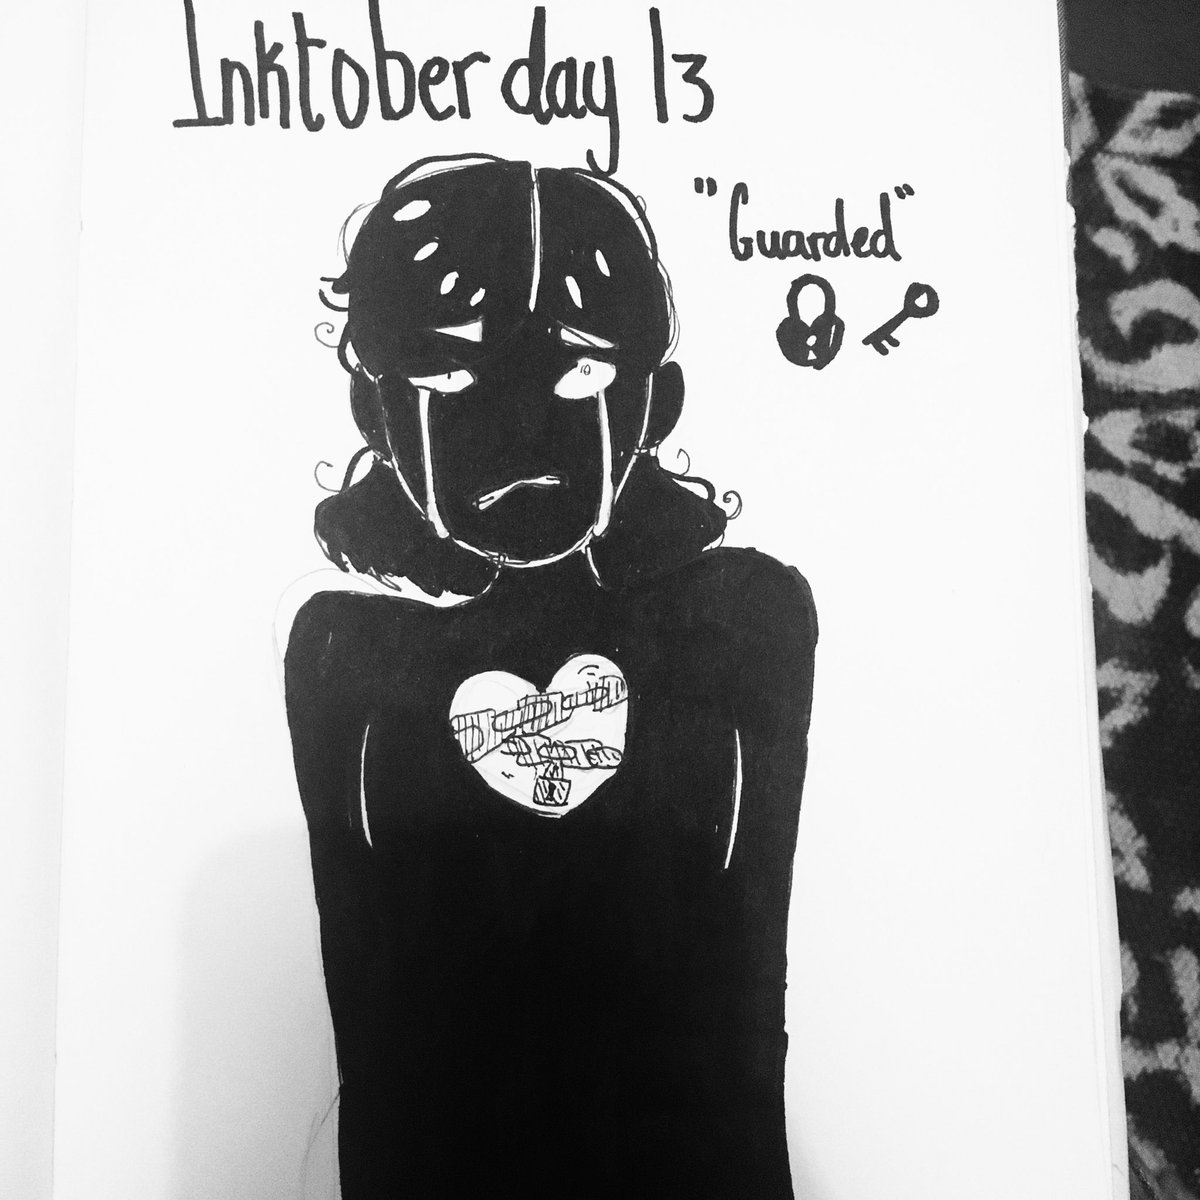 Inktober day13-"guarded" angst so much angst #InktoberDay13 #inktober #Inktober2018 #guarded #angst 